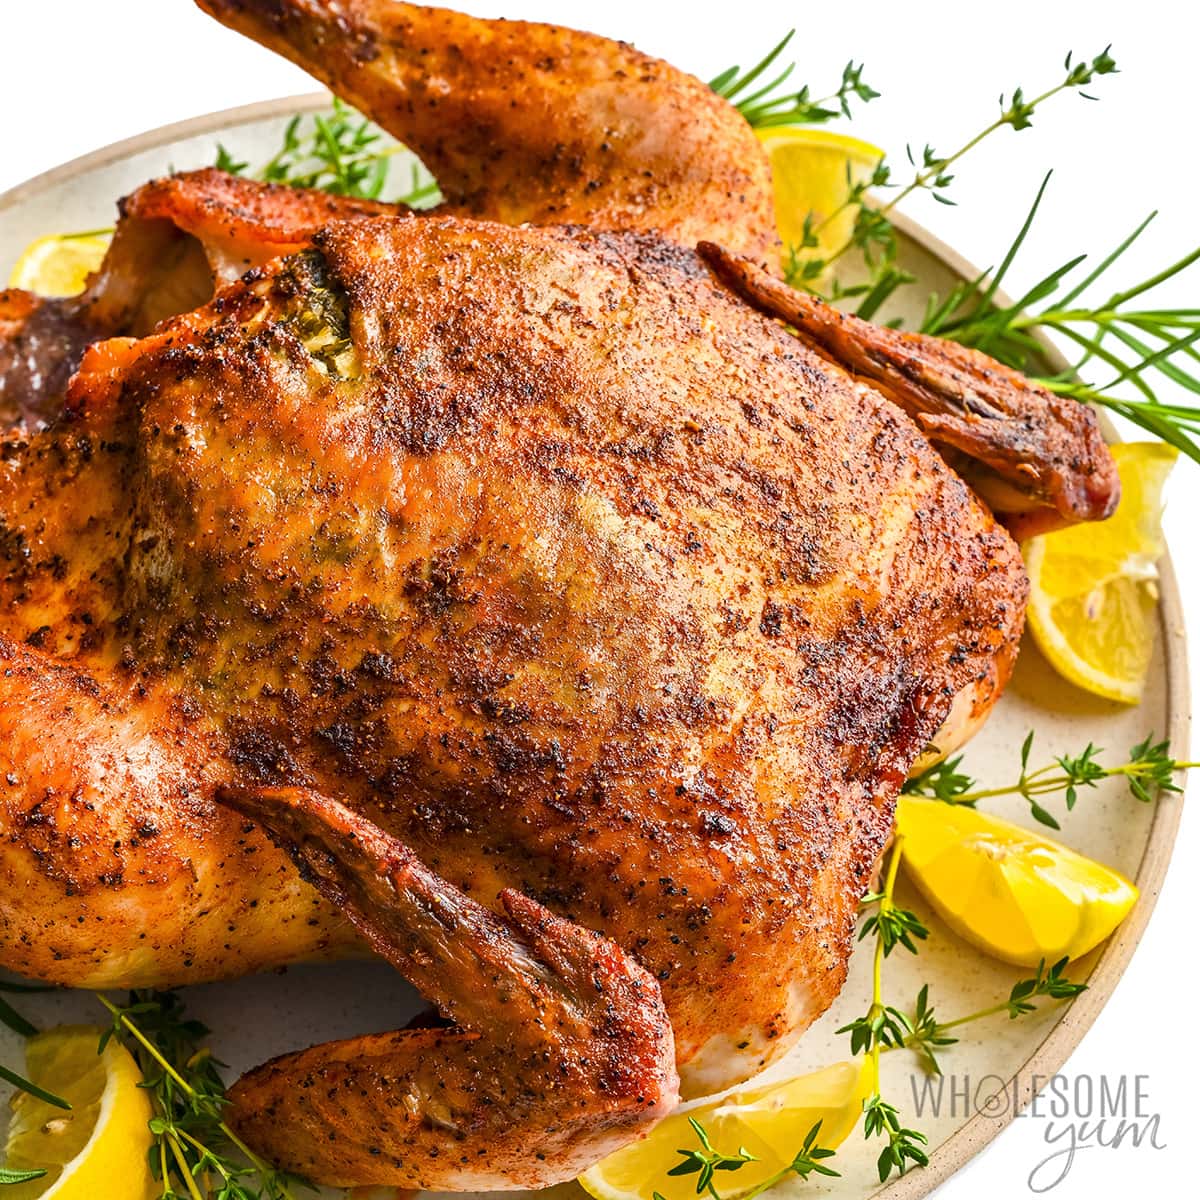 Roasted chicken on a platter with herbs and lemon wedges.